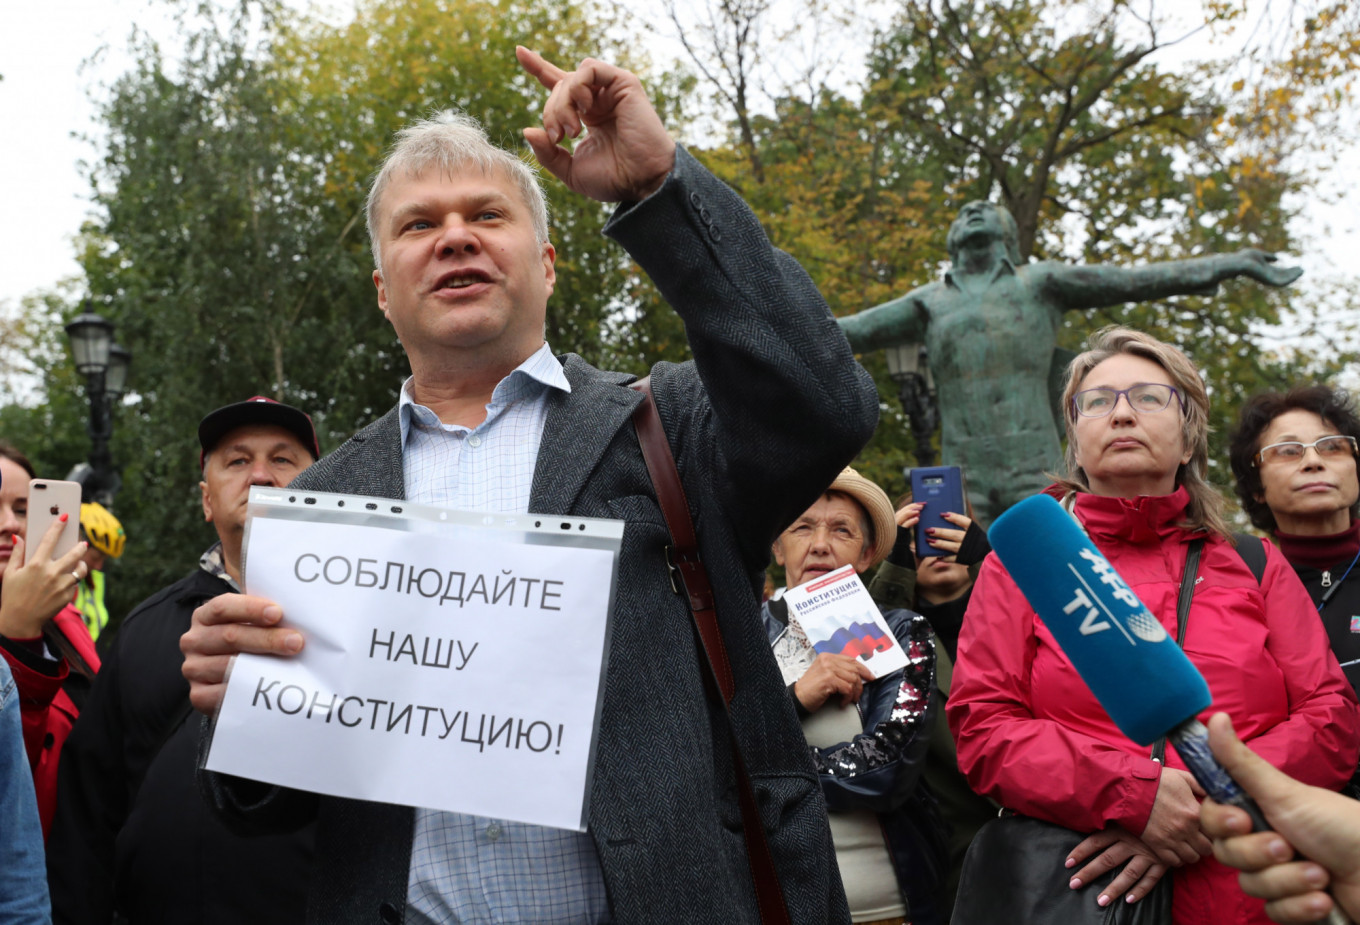 Russian Opposition Activists Picket for Free Elections